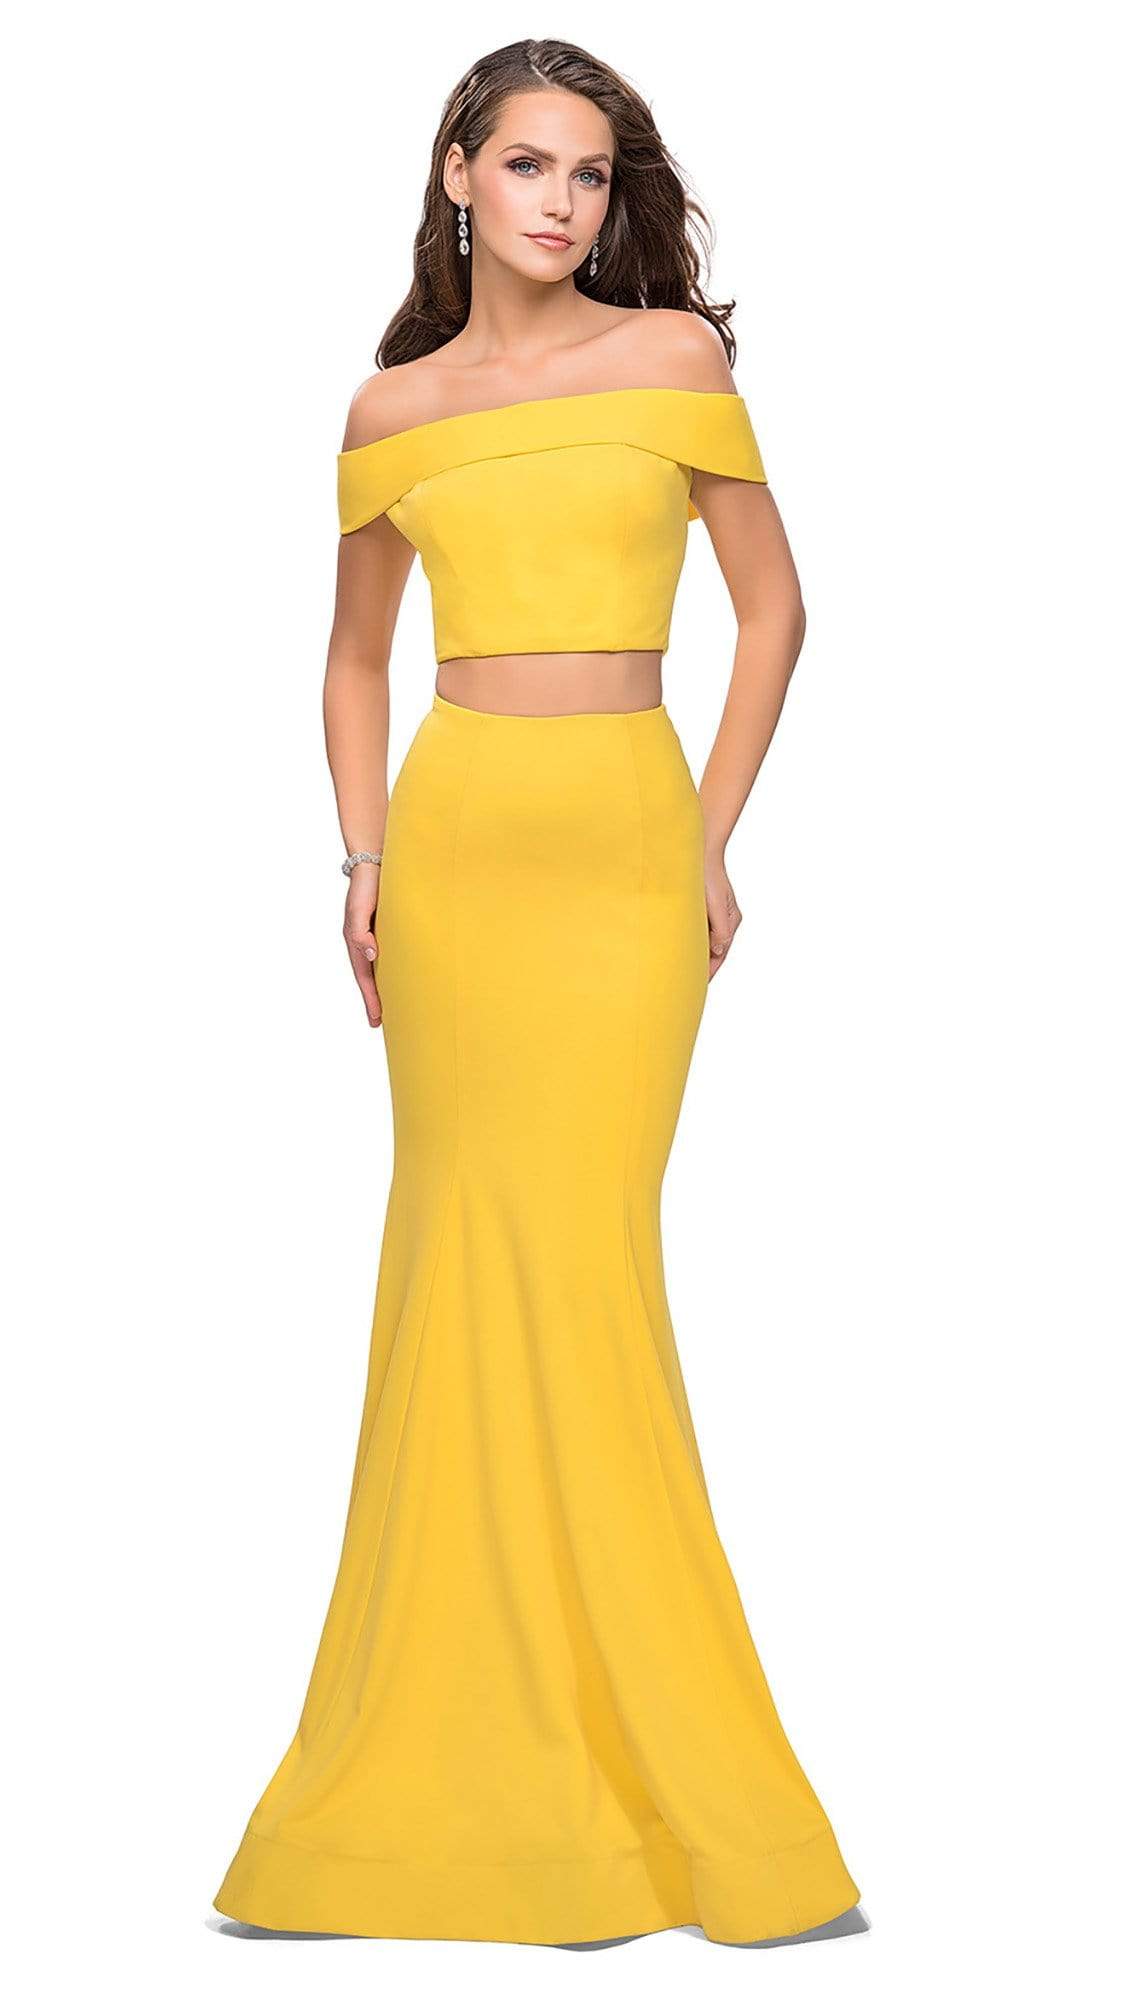 La Femme - 25578 Two-Piece Fold-Over Off Shoulder Jersey Gown Evening Dresses 00 / Yellow